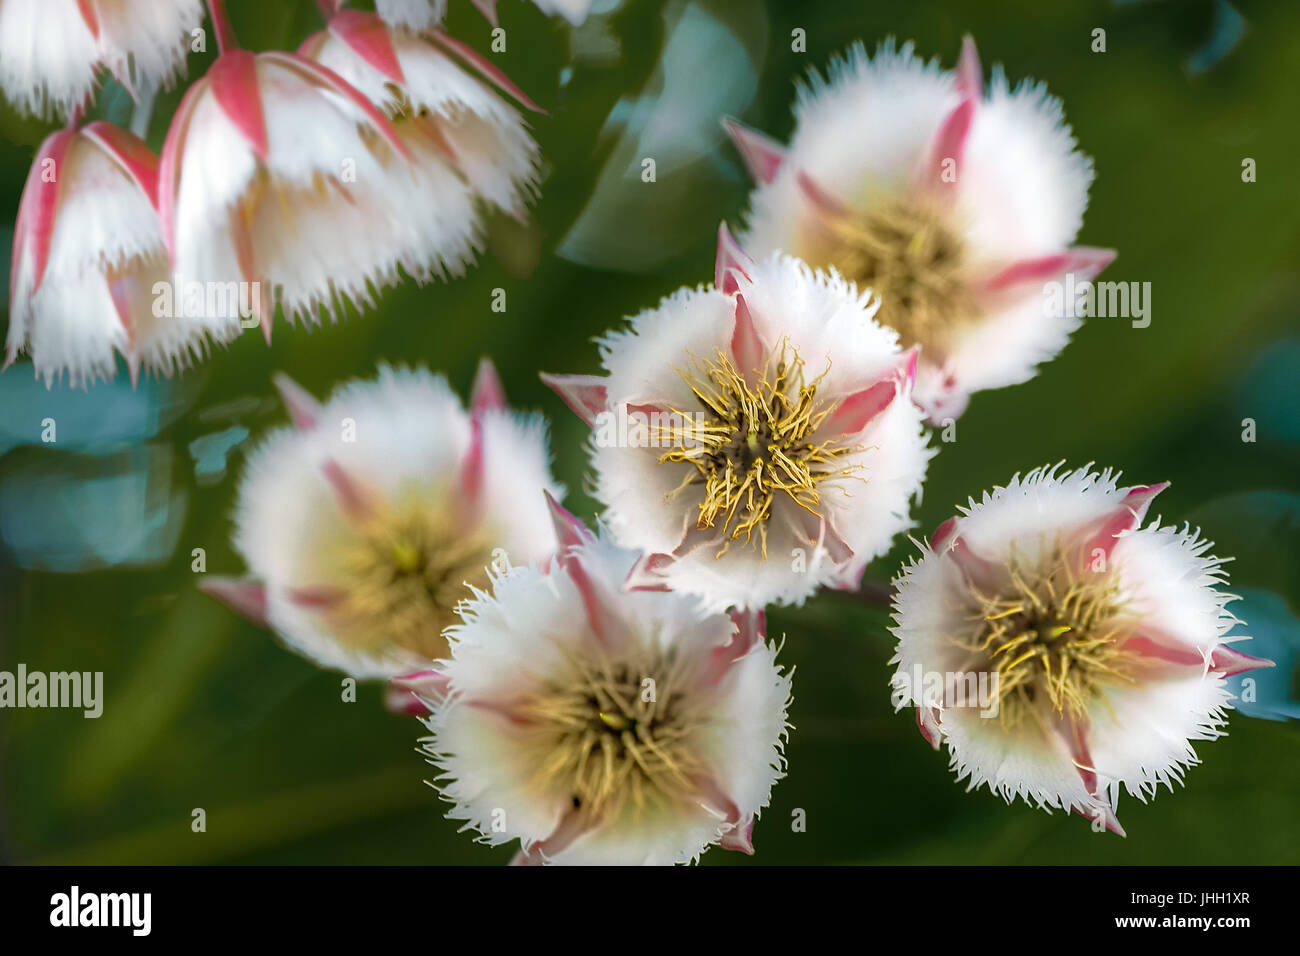 Fairy Petticoats in bloom. Stamens with weird shape filaments. Sperm-like filaments swimming around stigma. A petticoat or underskirt shape. Stock Photo